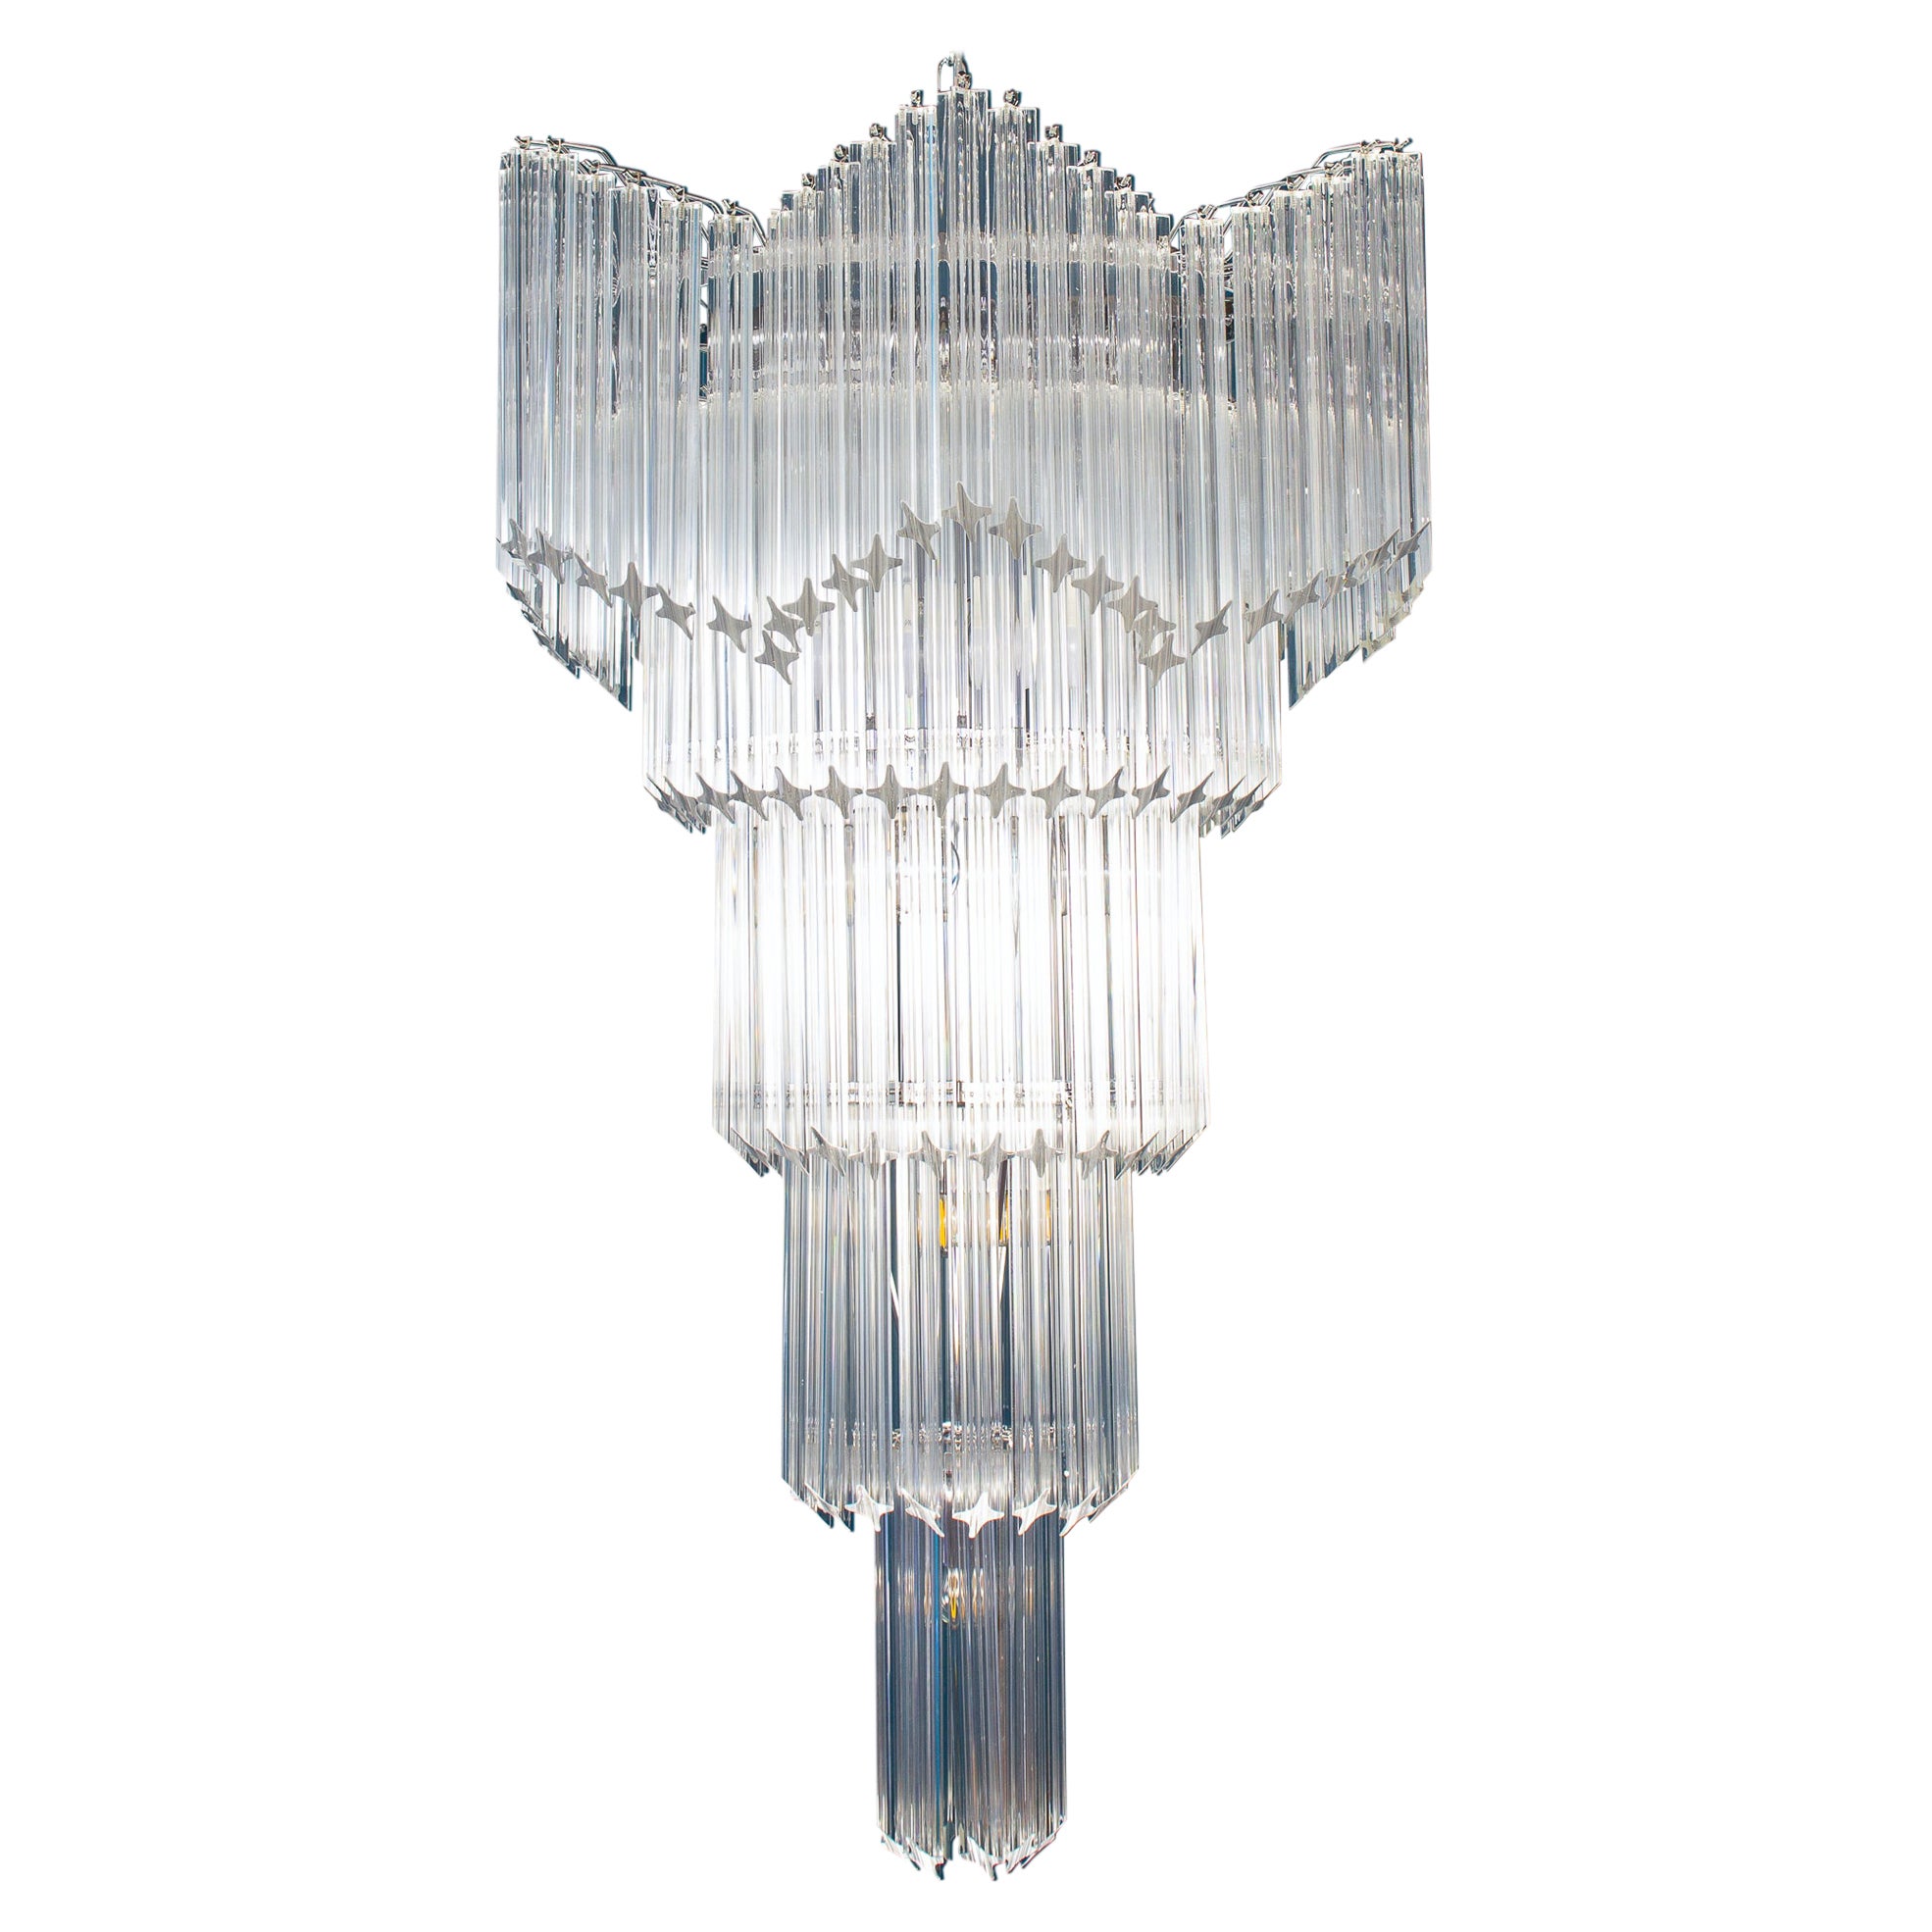 Huge multitier triedi crystal prism chandelier.
 Variation available .
Price is for 1 item.
Available also a pair.

Measures: Height
120 cm glass + 30 cm chain = total height 150 cm.
Diameter 70 cm.

This light fixture can be disassembled and the